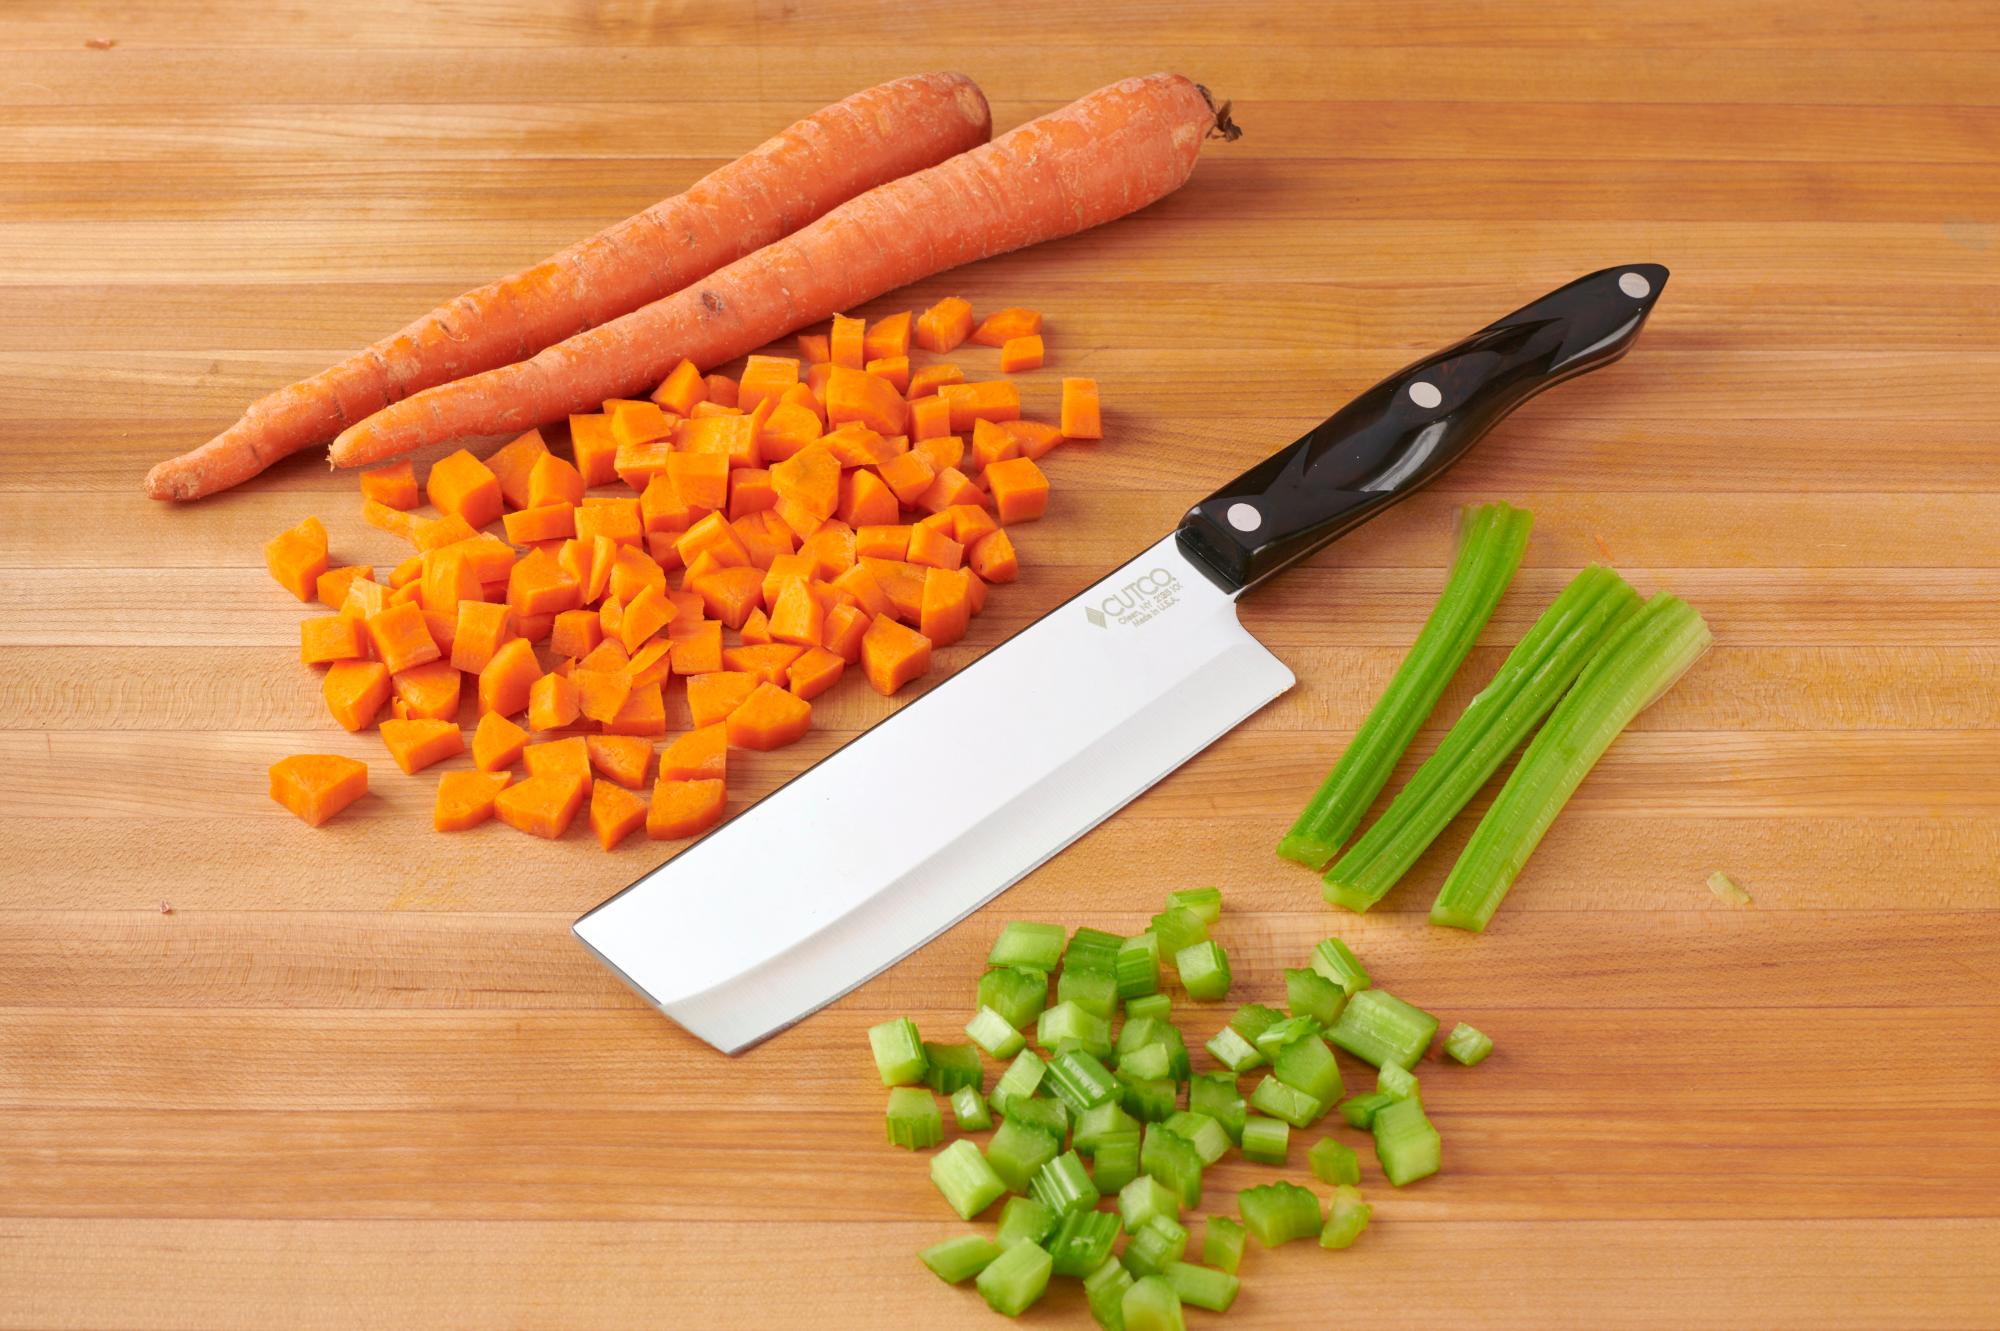 Dice the carrots and celery with a 6 Inch Vegetable Knife.